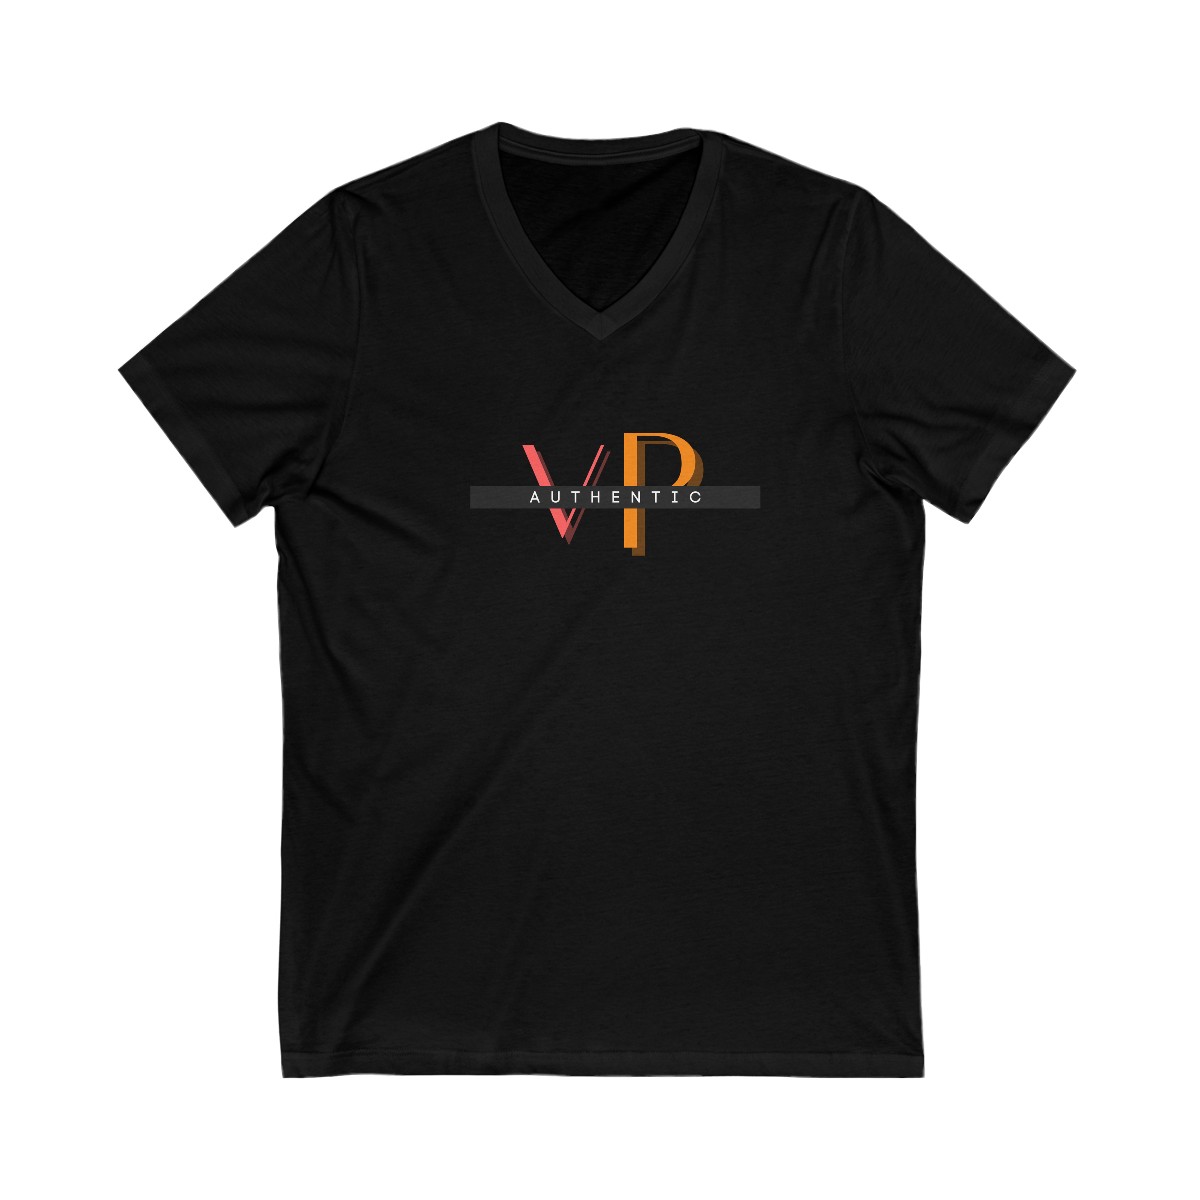 VP authentic Brand Tee product thumbnail image